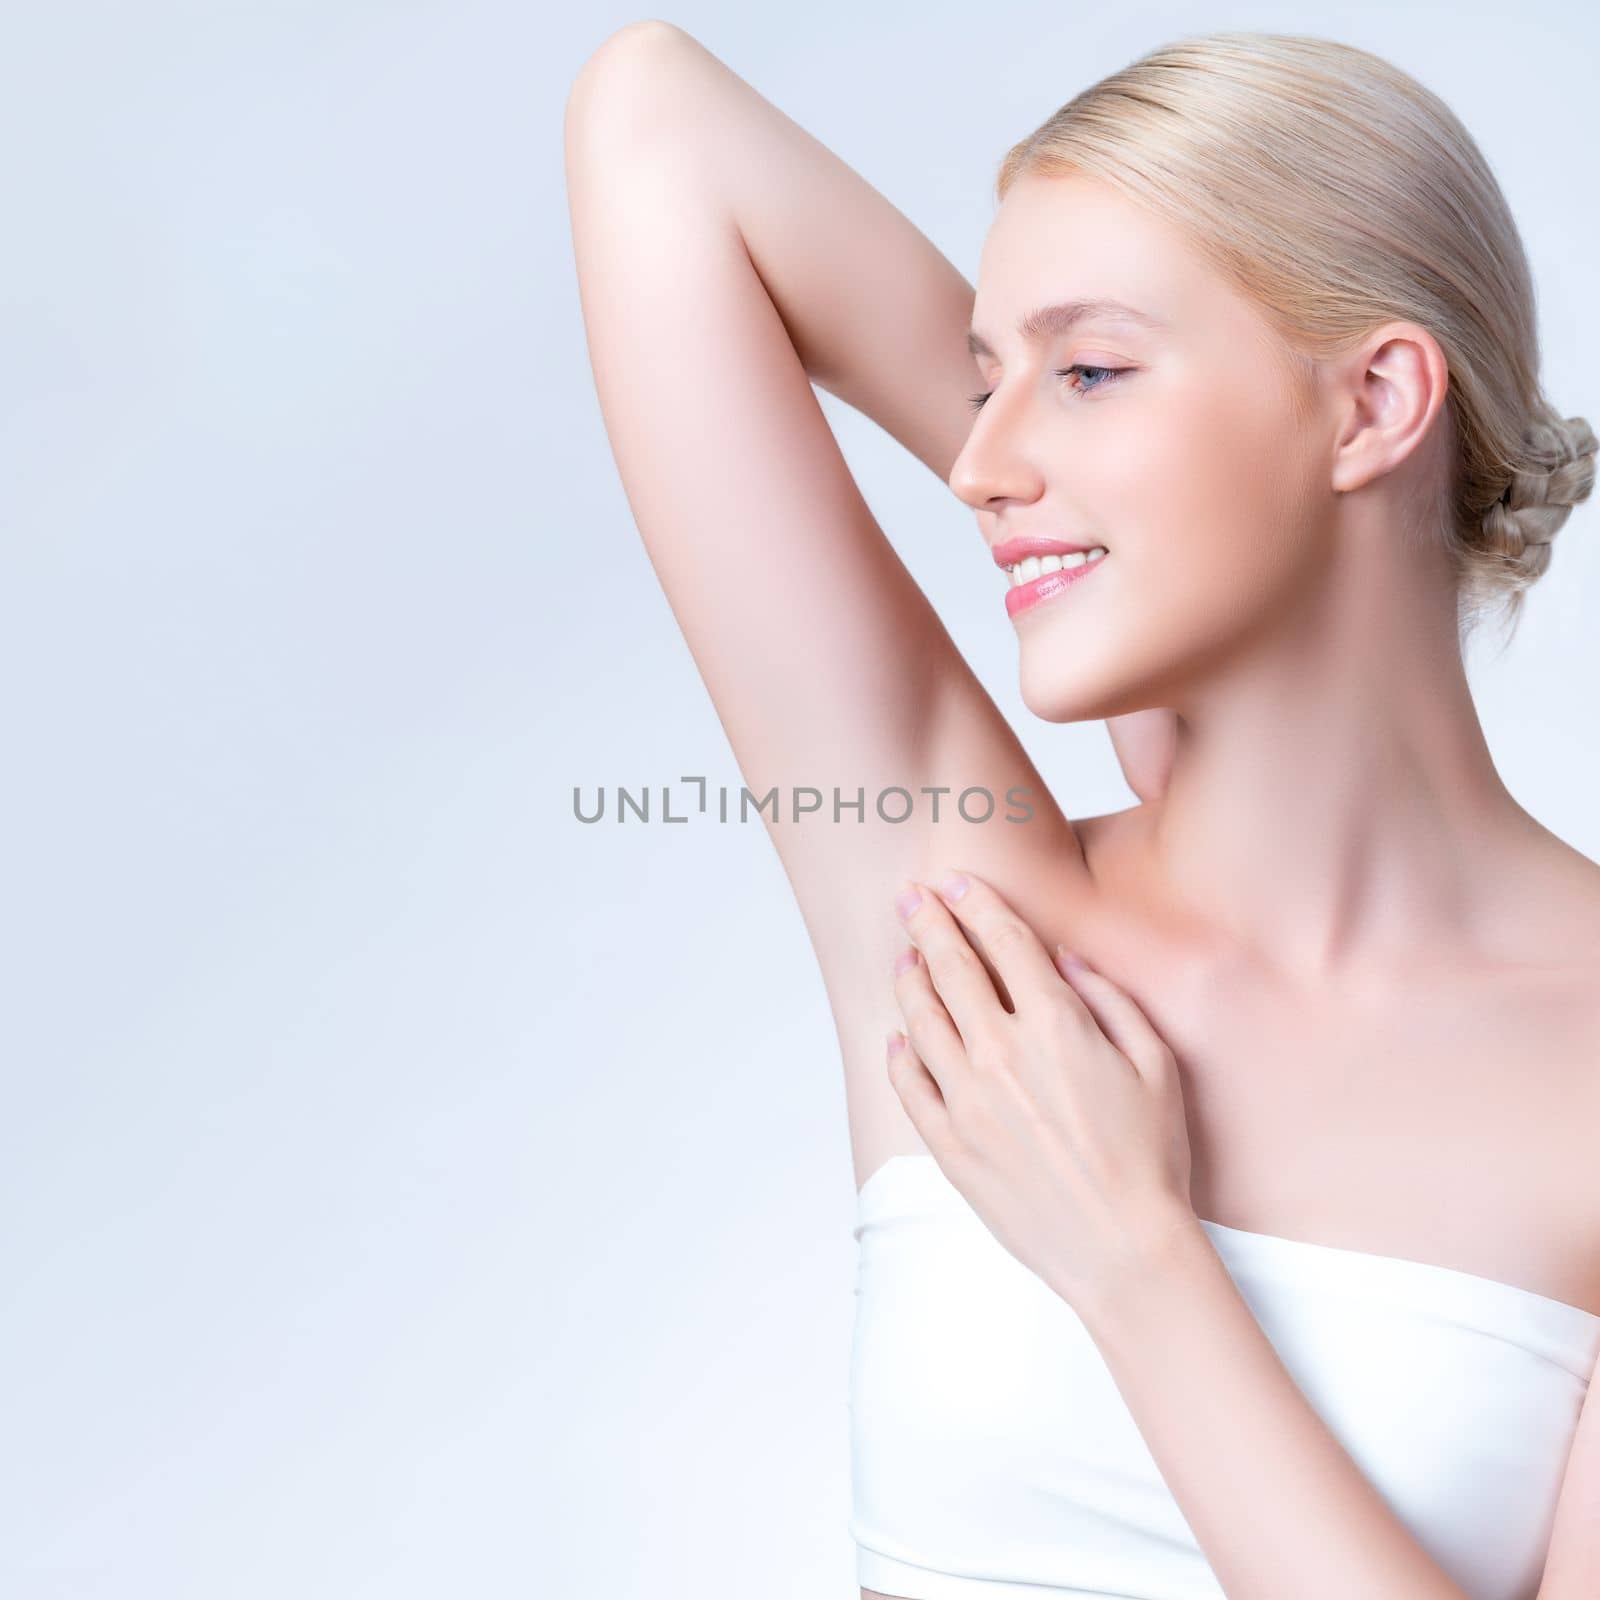 Closeup personable beautiful woman lifting her arm, showing her smooth clean skin and hairless underarm as beauty care concept of armpit laser hair removal and epilation in isolated background.